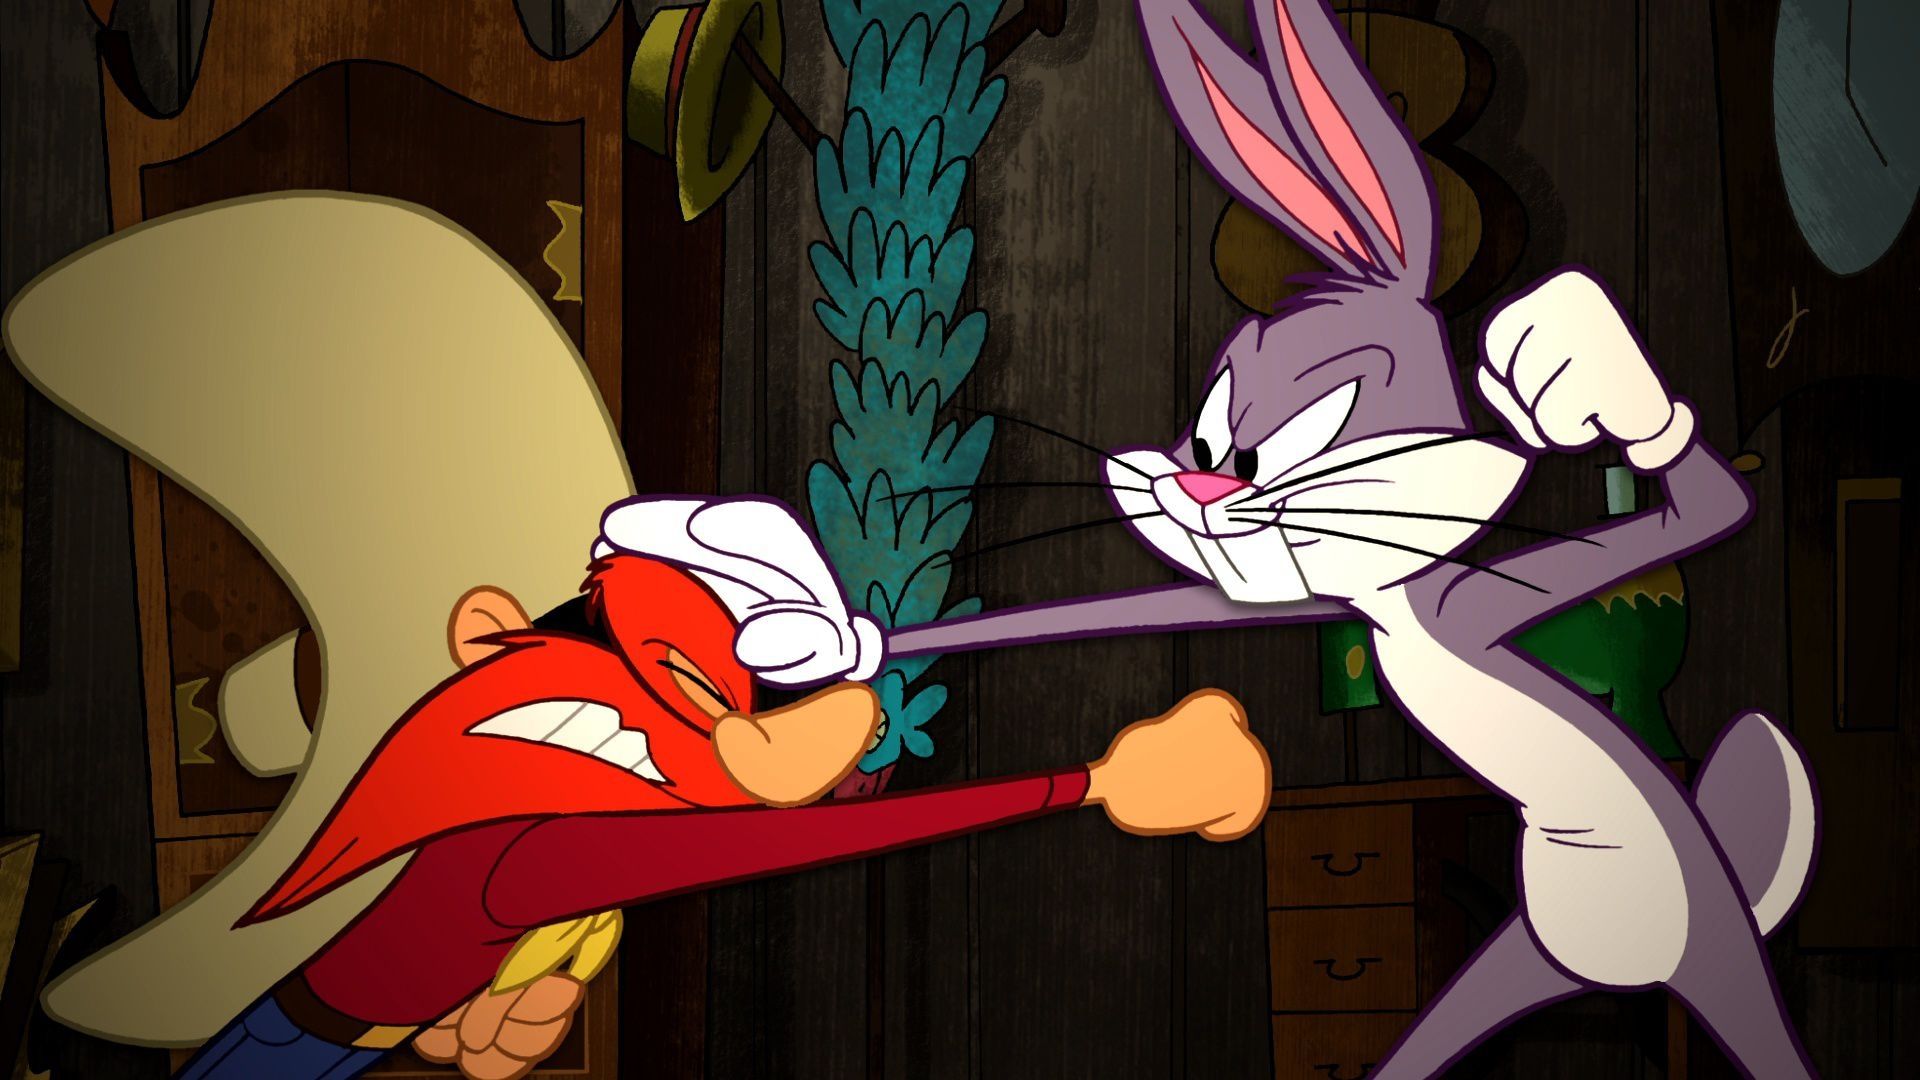 Bugs Bunny and Daffy Duck team up to take down a common enemy in a new Looney Tunes short. - Bugs Bunny